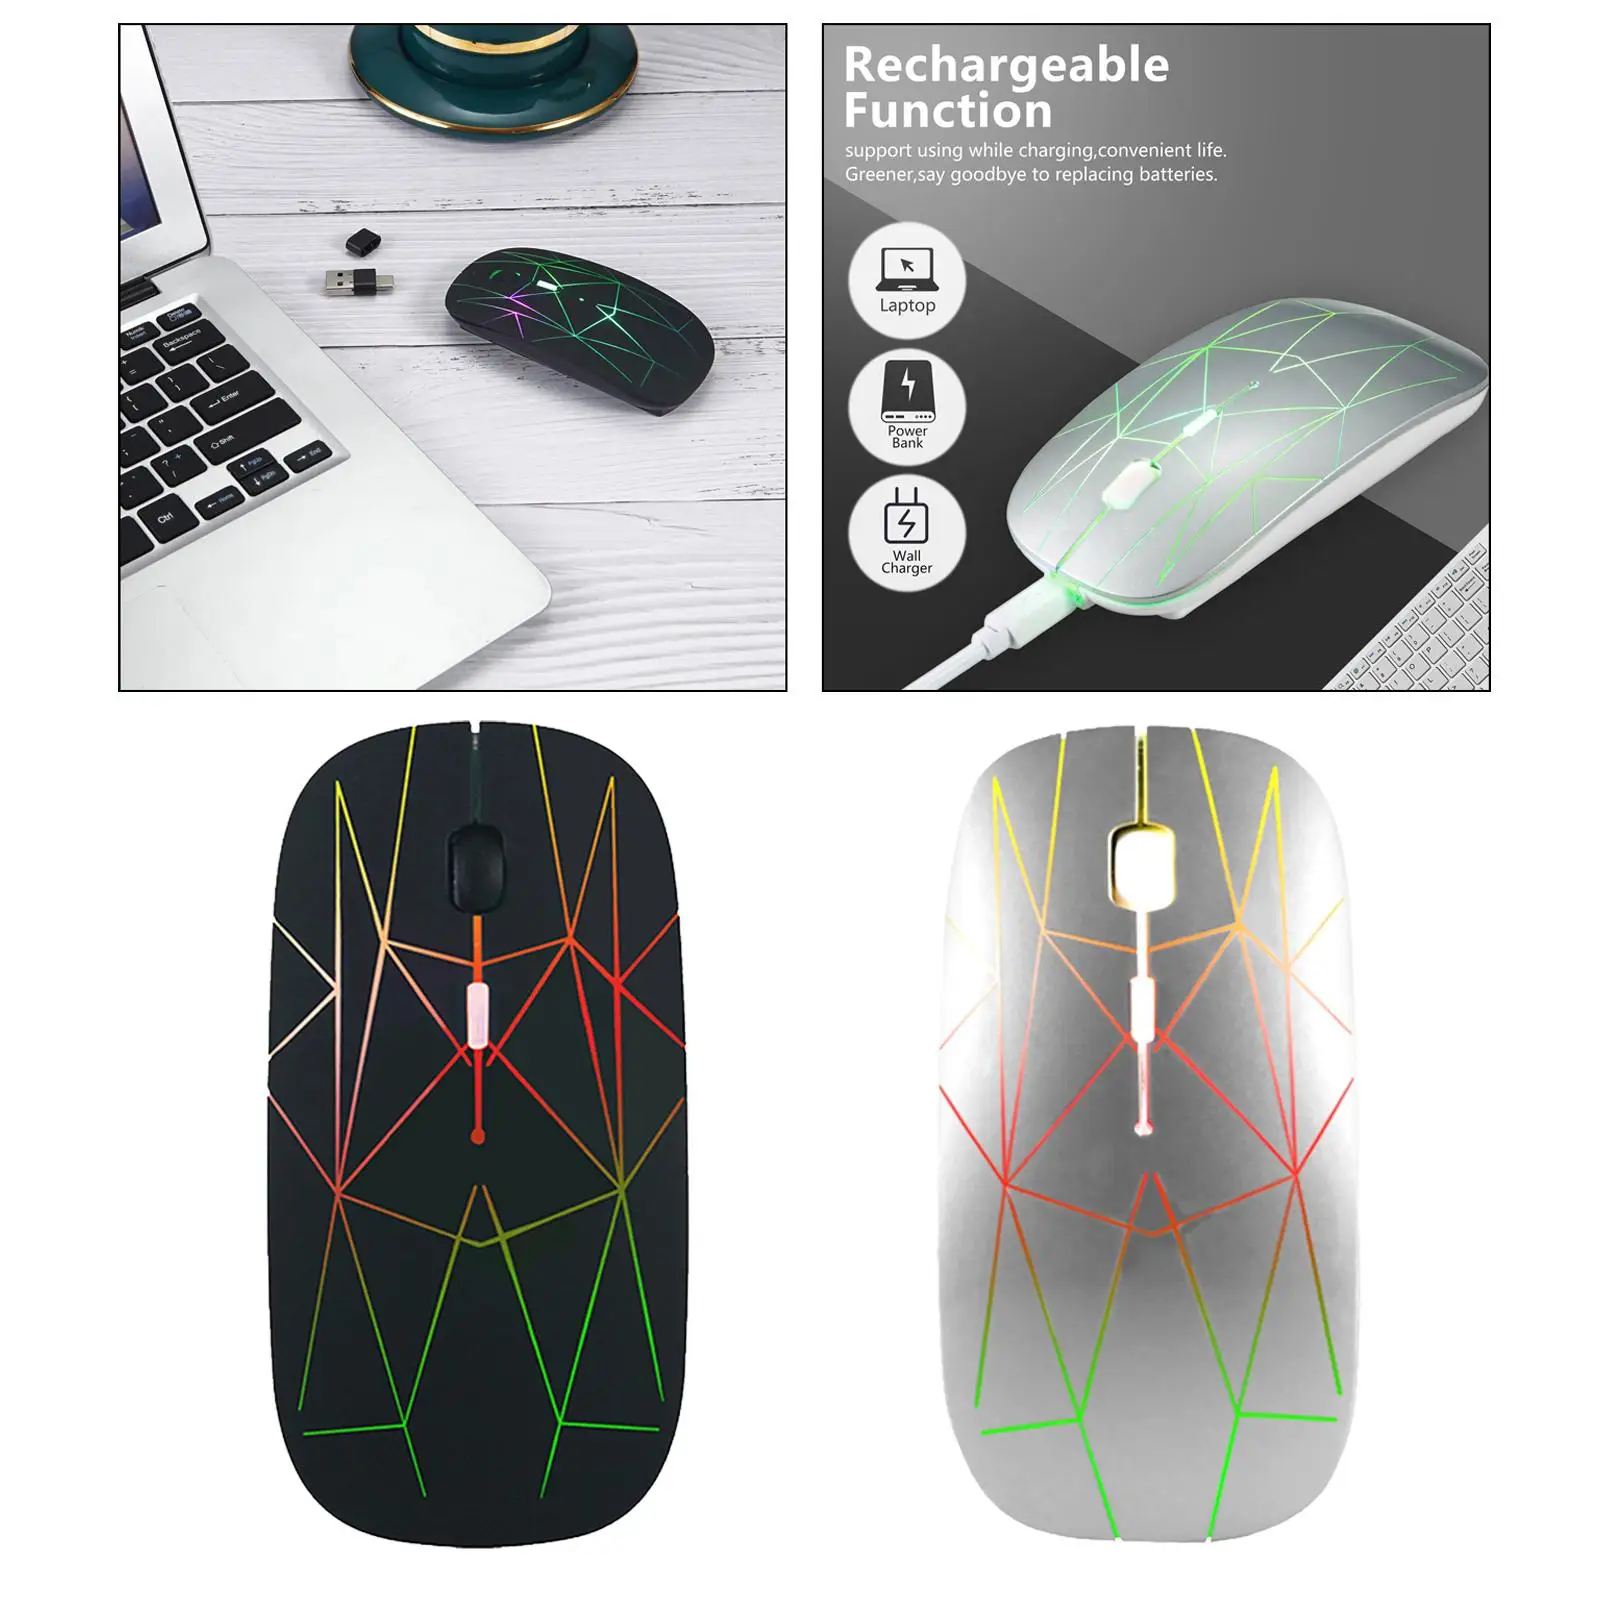 Slim LED Wireless Mouse Rechargeable Adjustable DPI LED Breathing Lights Mobile Optical Mouse Silent 4 Buttons for Laptop Office